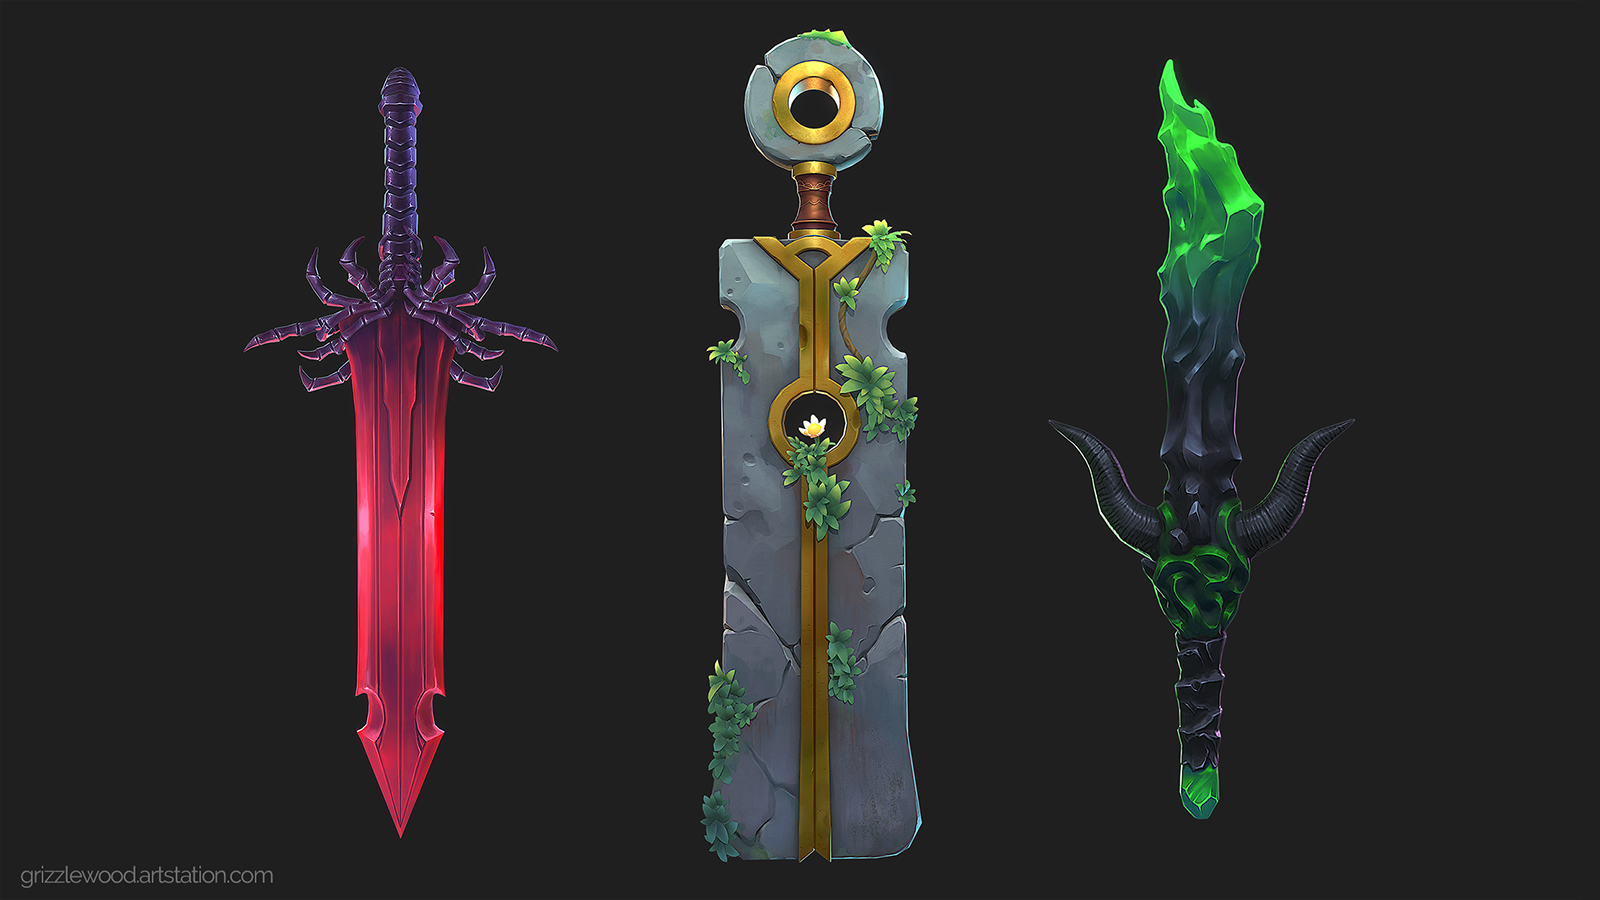 A collection of stylised, hand-painted swords inspired by the style of World of Warcraft by BA Games Art and Design student Adam Wood.